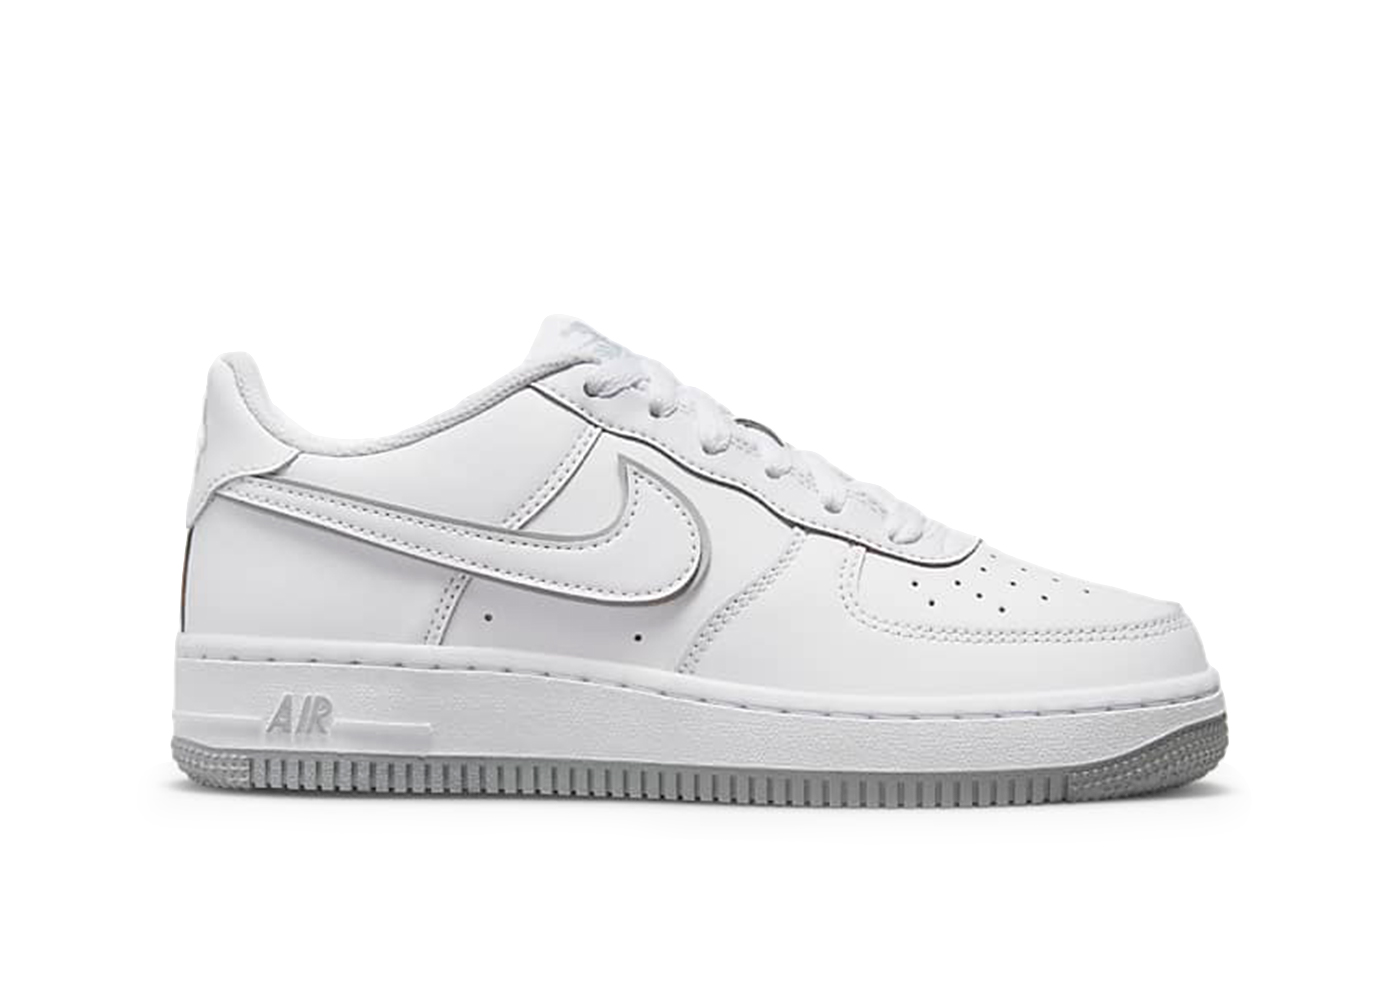 Nike Air Force 1 Low White Wolf Grey (GS) Kids' - DX5805-100 - US